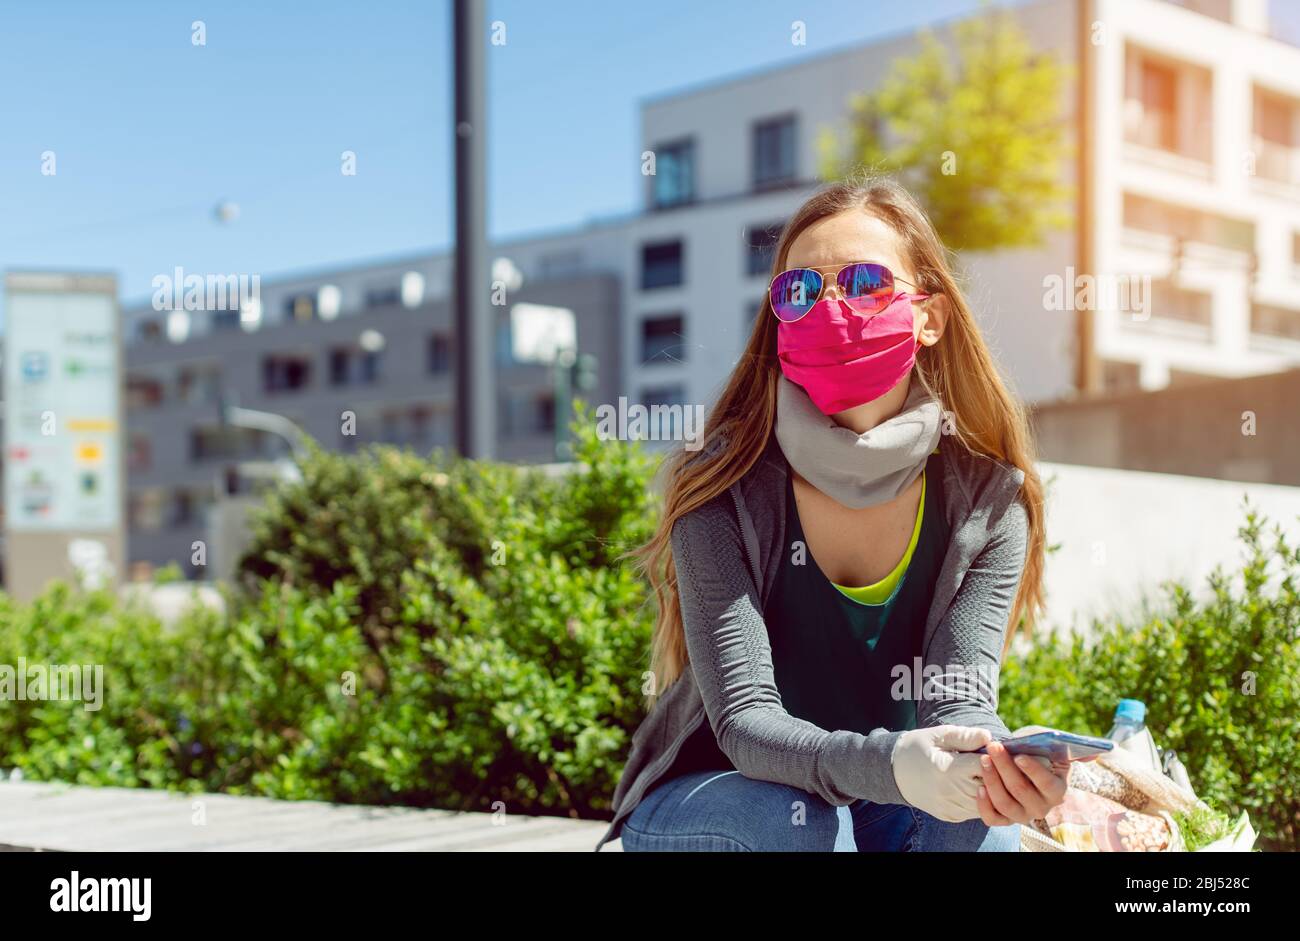 Woman with face mask sitting outside as lockdown opens Stock Photo